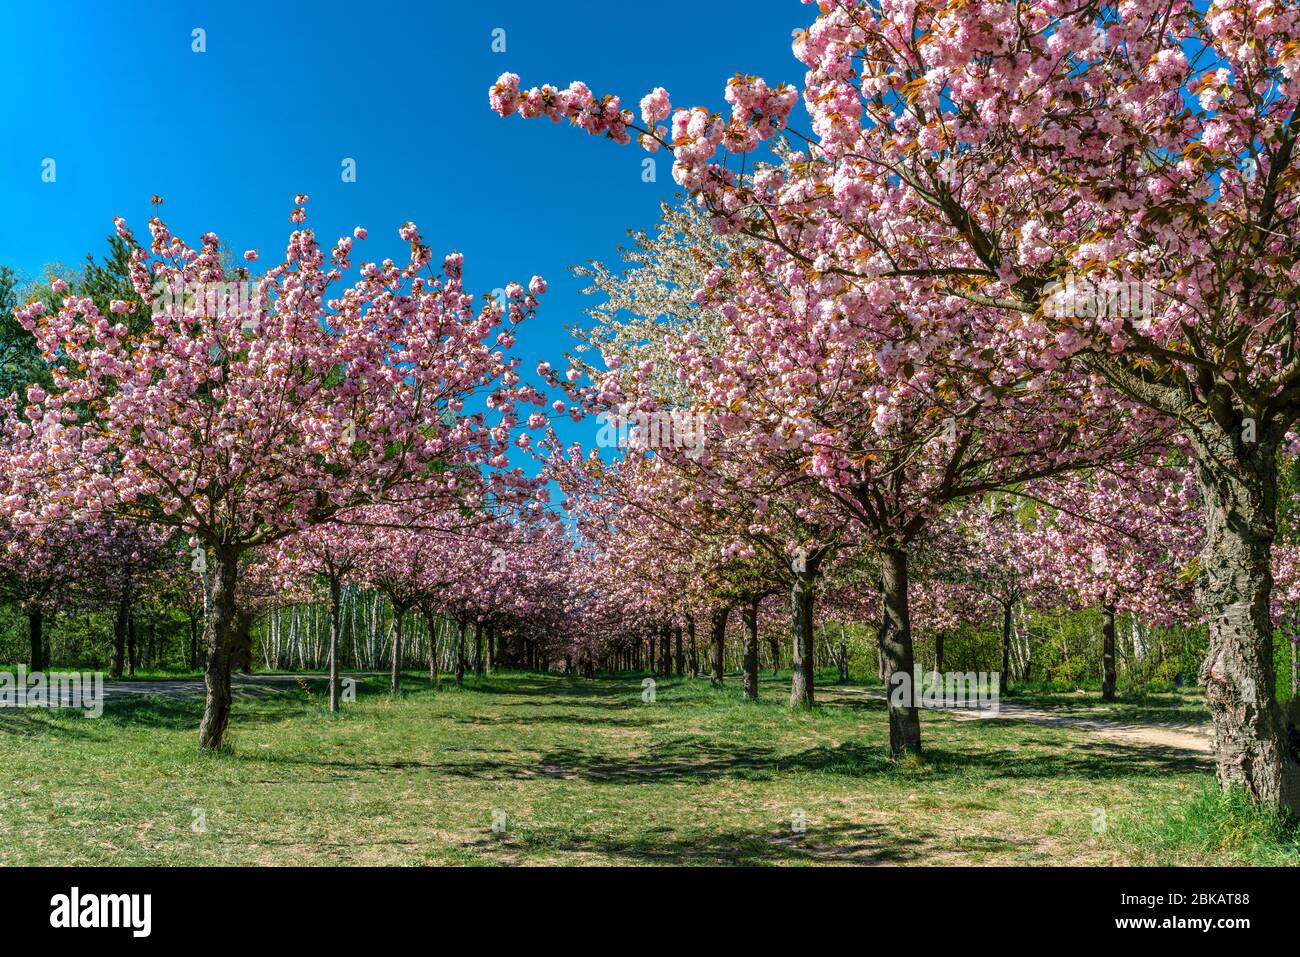 Cherry blossom at the TV-Asahi-Alley in Teltow, Germany Stock Photo